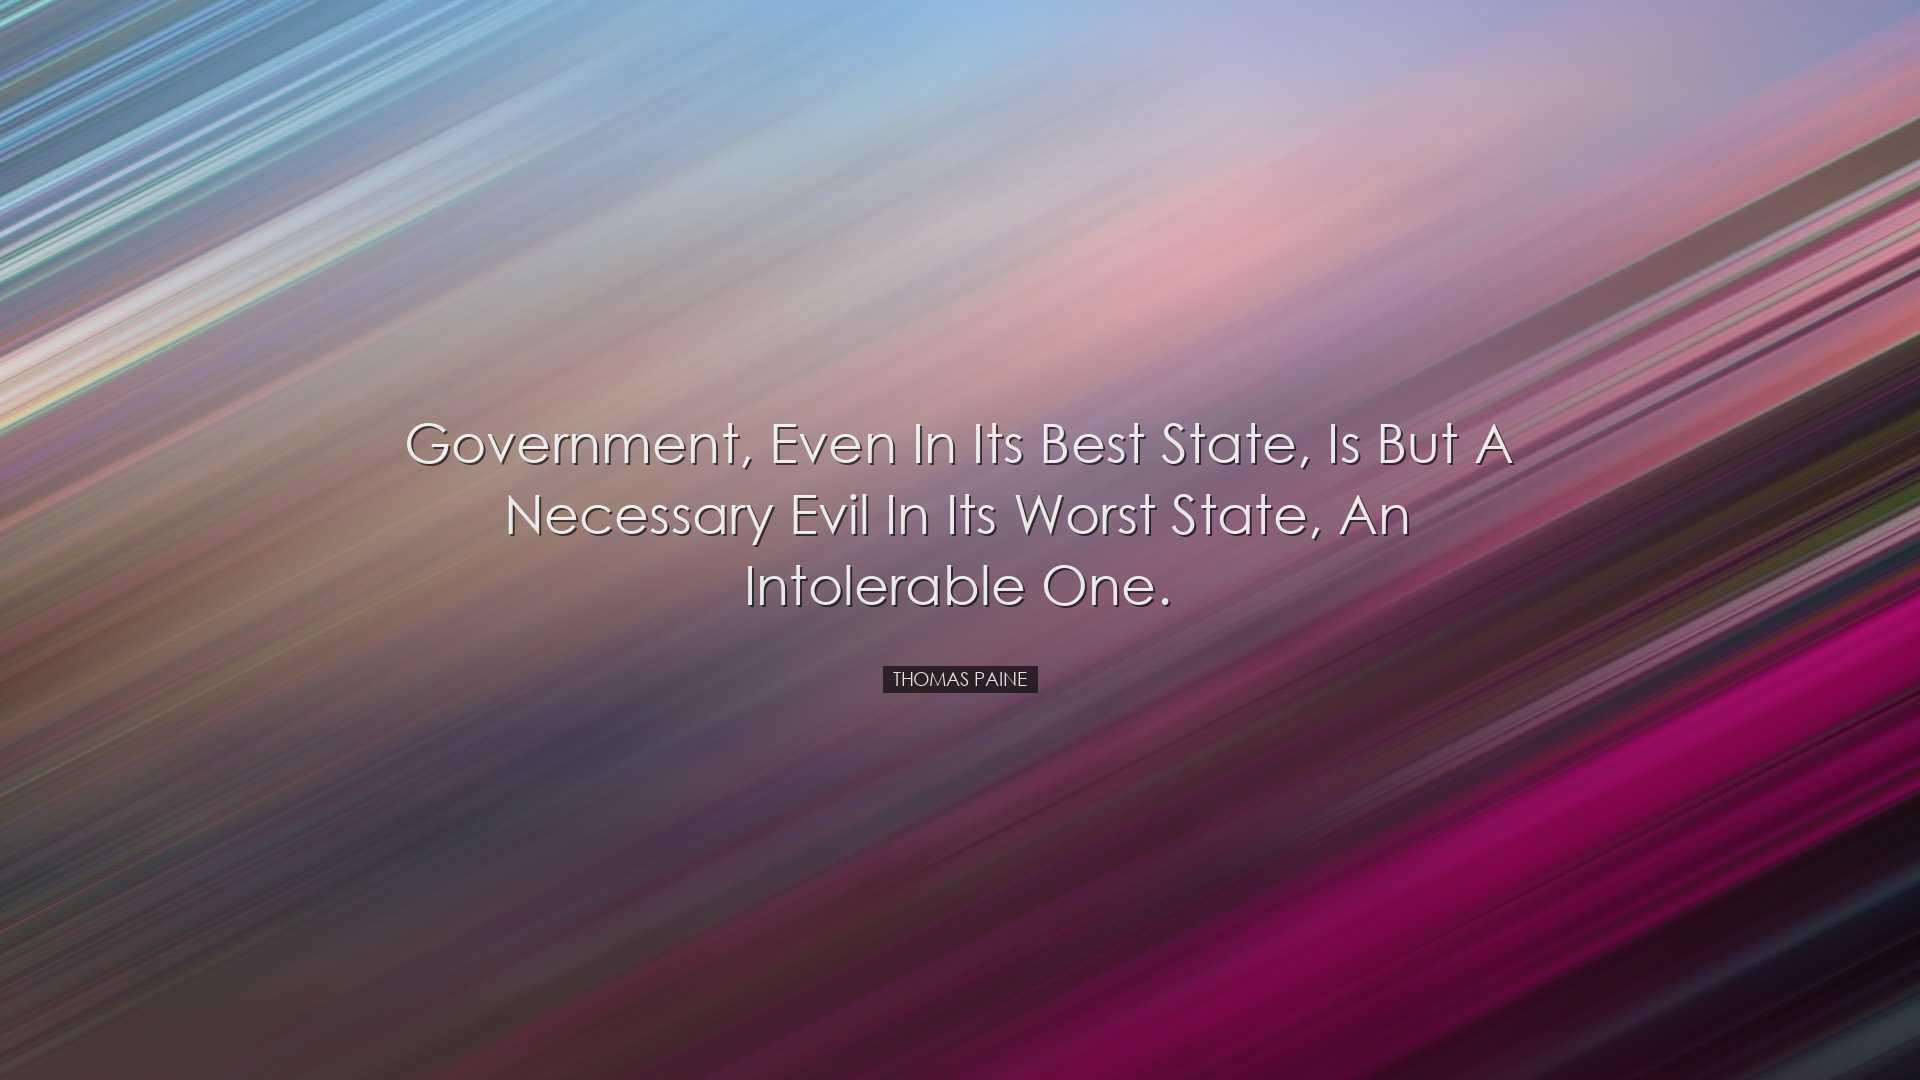 Government, even in its best state, is but a necessary evil in its